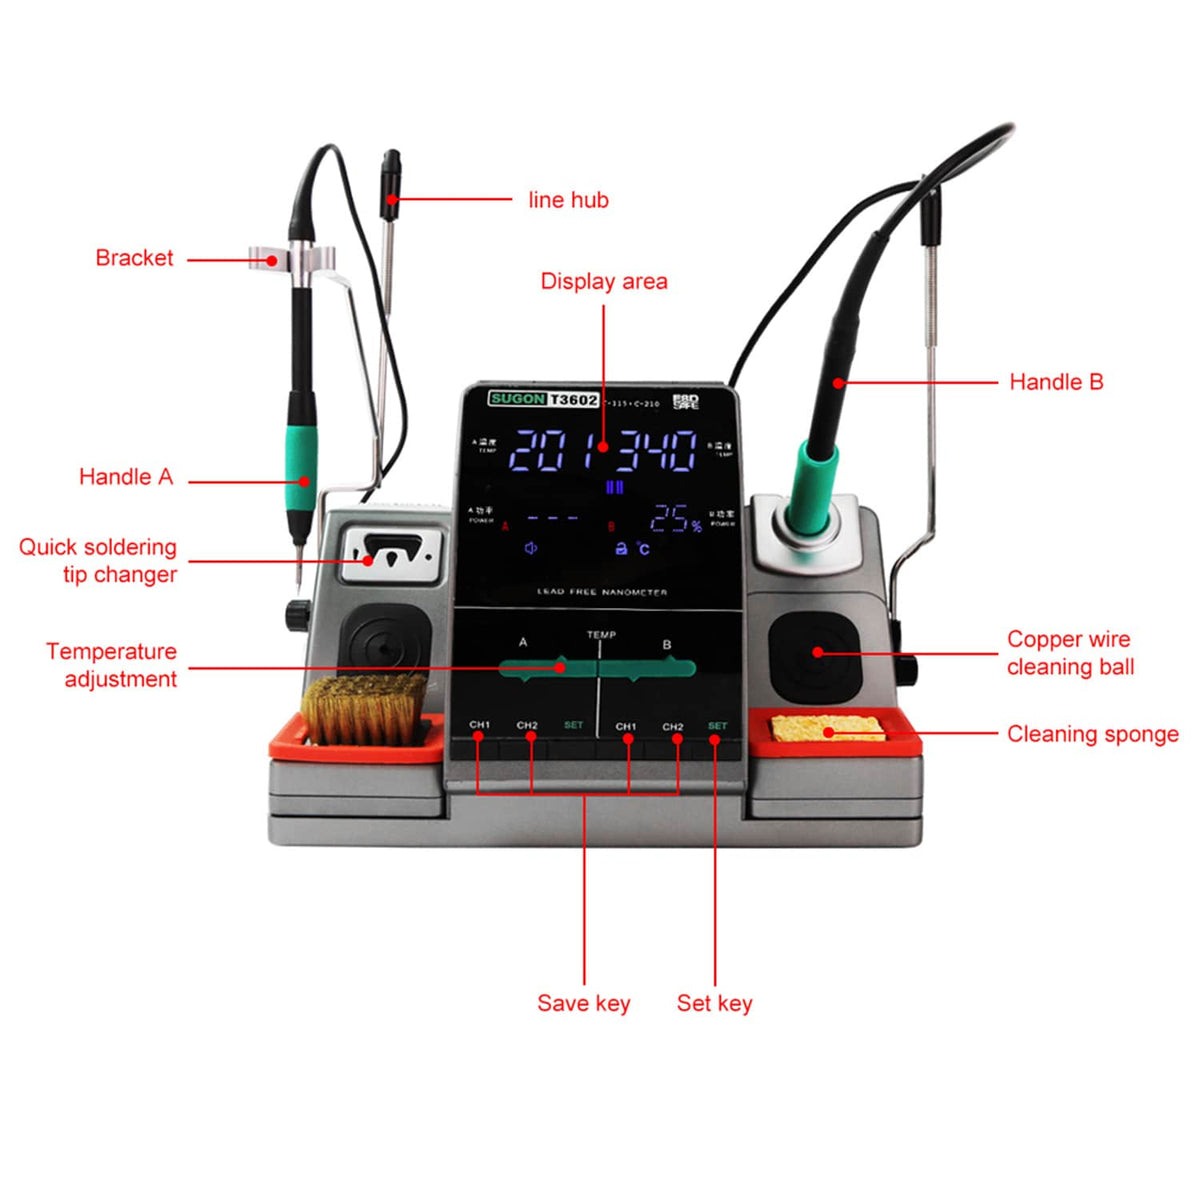 SUGON T3602 NANO 2IN1 SOLDERING REWORK STATION WITH JBC C210 C115 SOLDERING TIPS